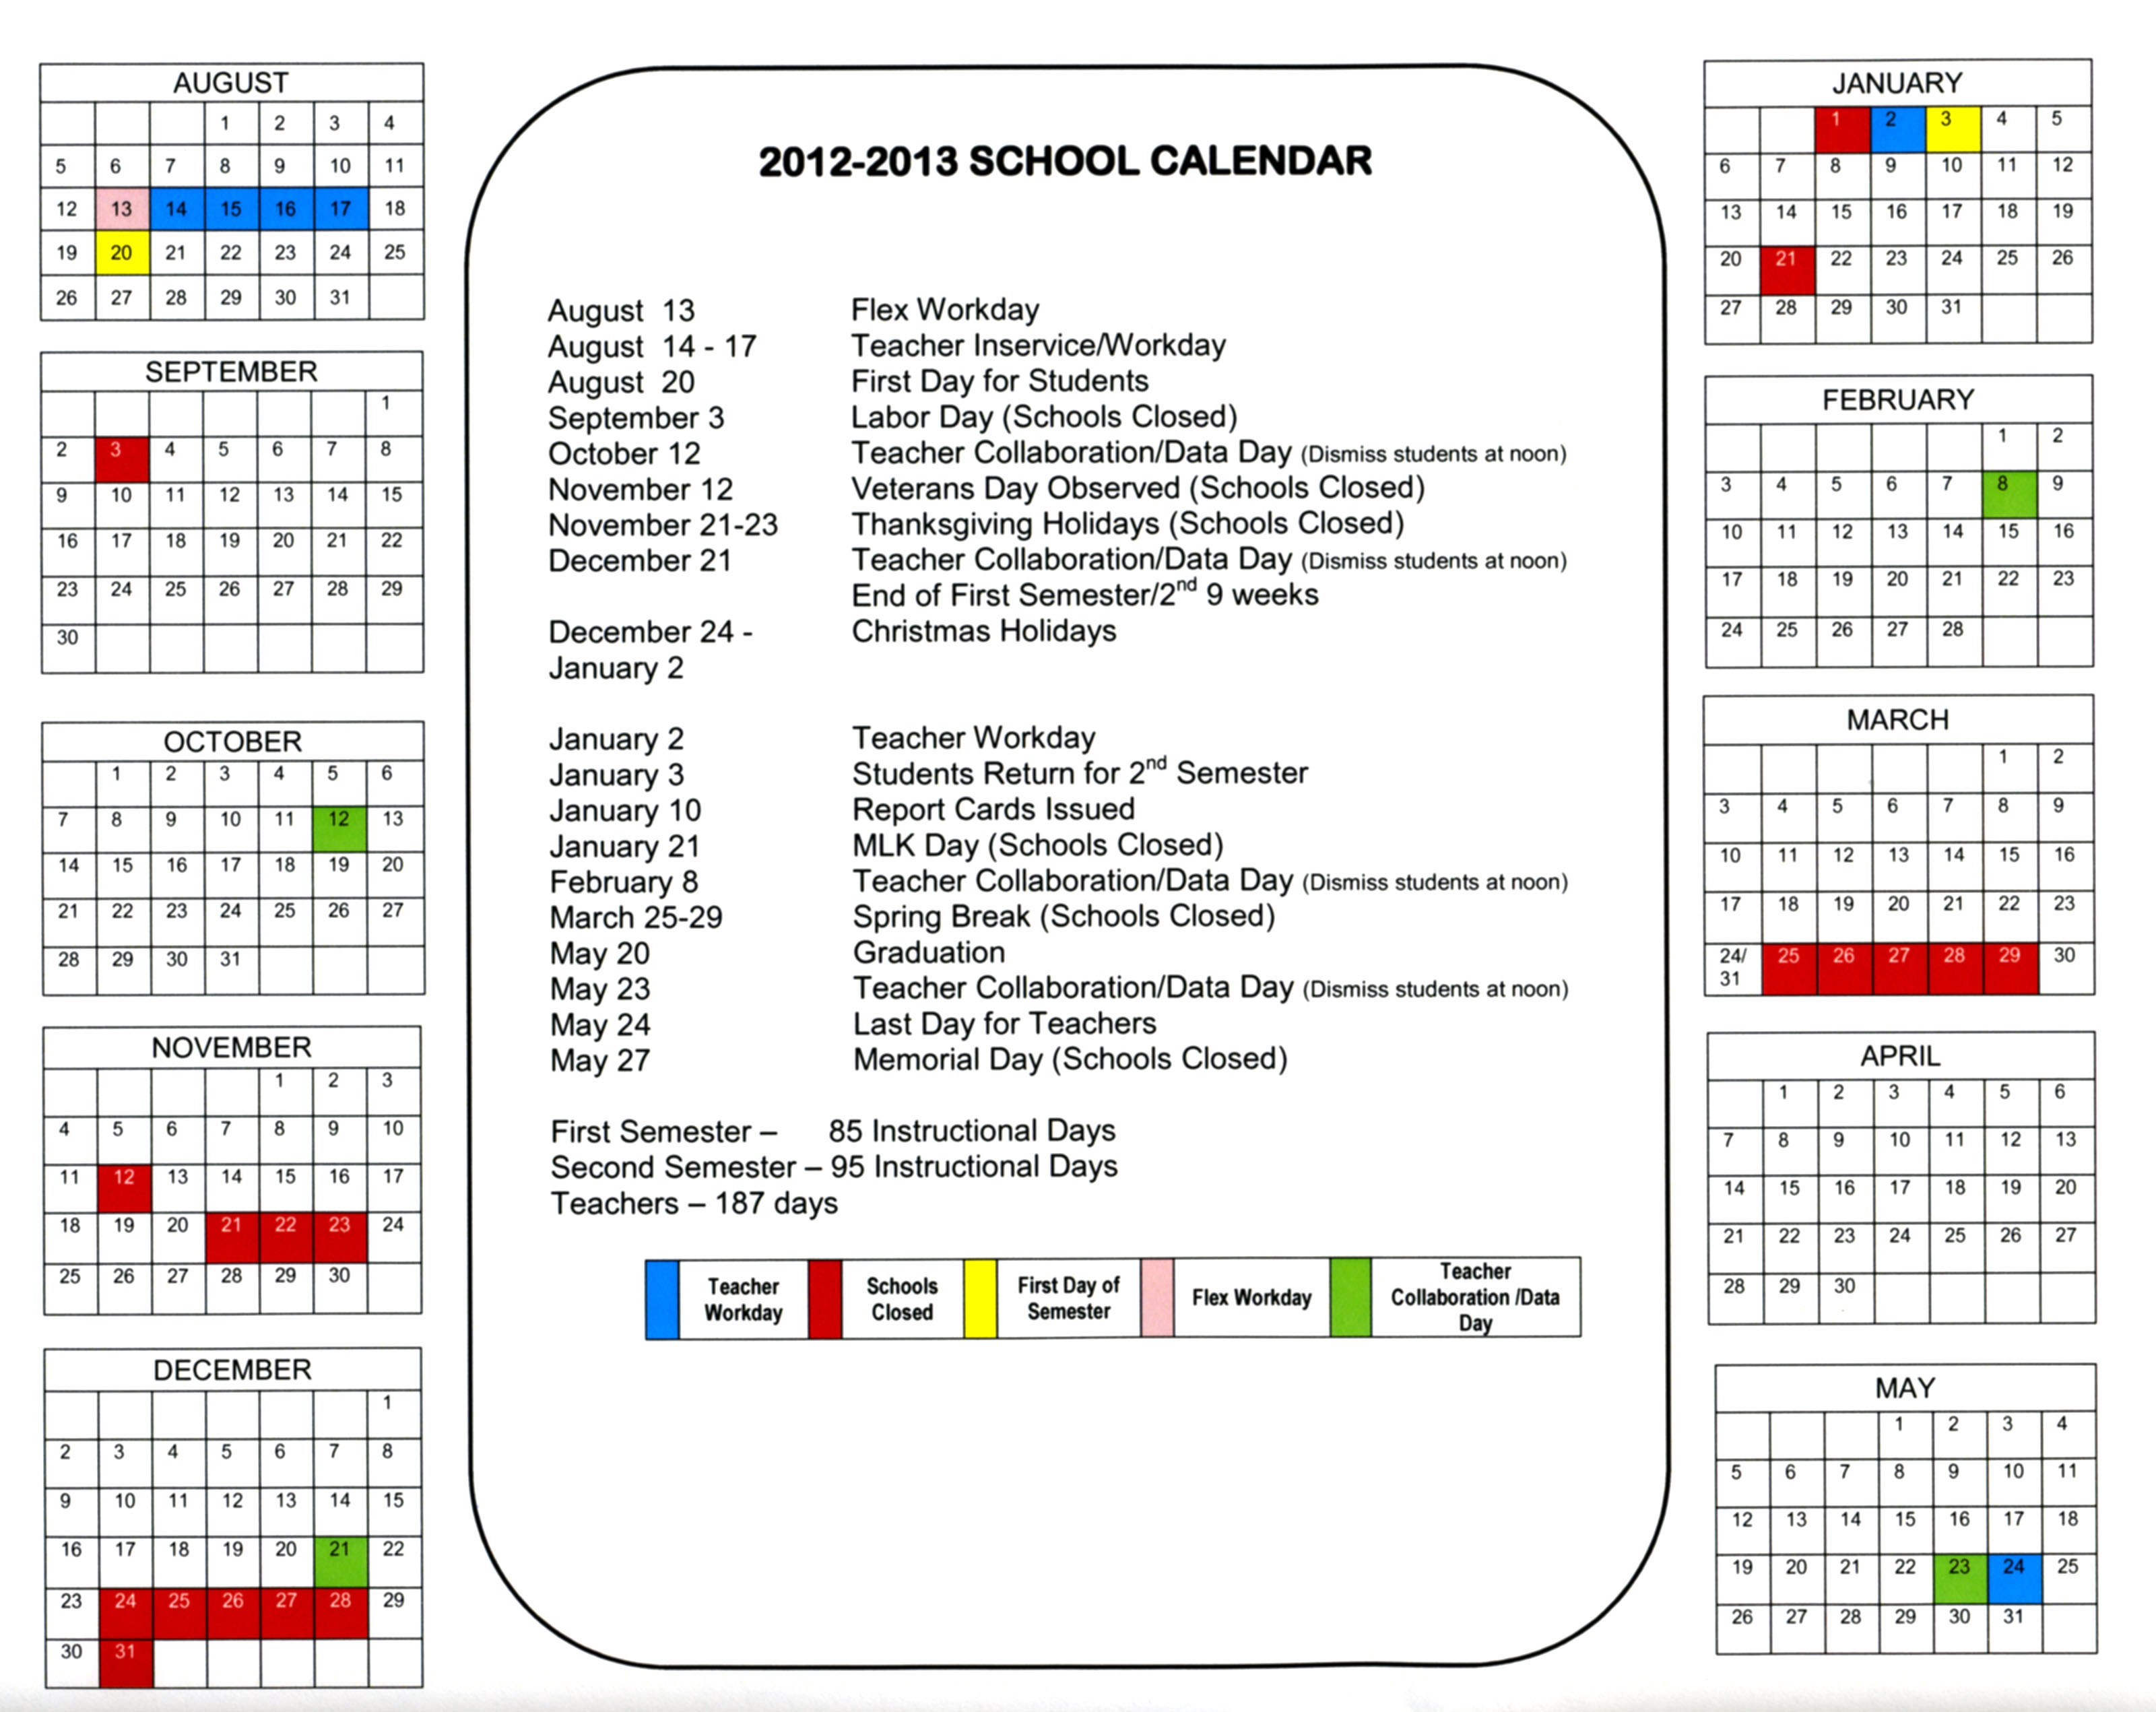 morgan-boe-updates-school-calendar-with-links-to-calendars-the-hartselle-enquirer